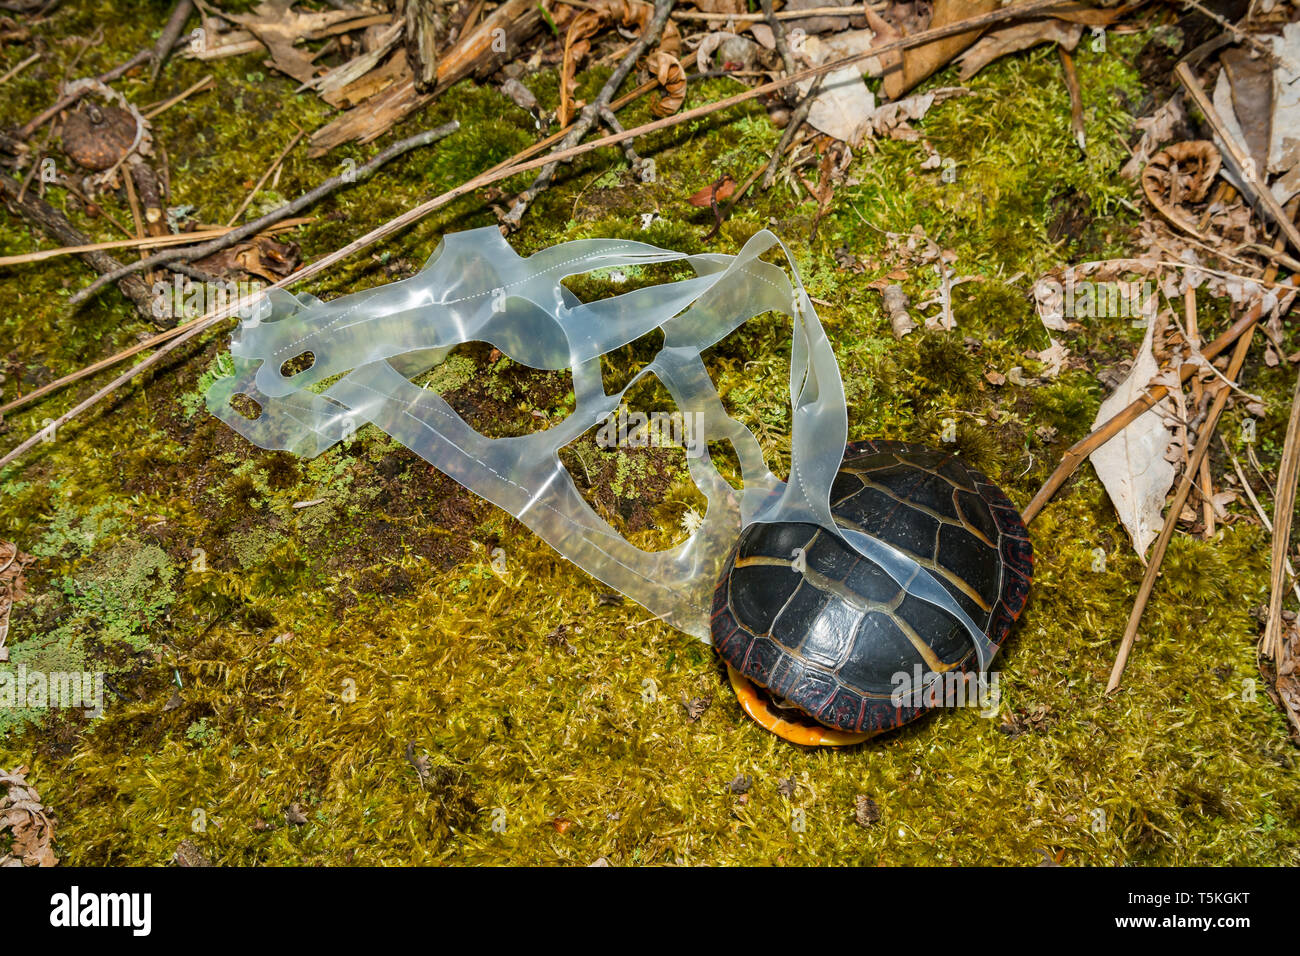 Eastern Painted Turtle entangled in a plastic six pack drink holder. Stock Photo